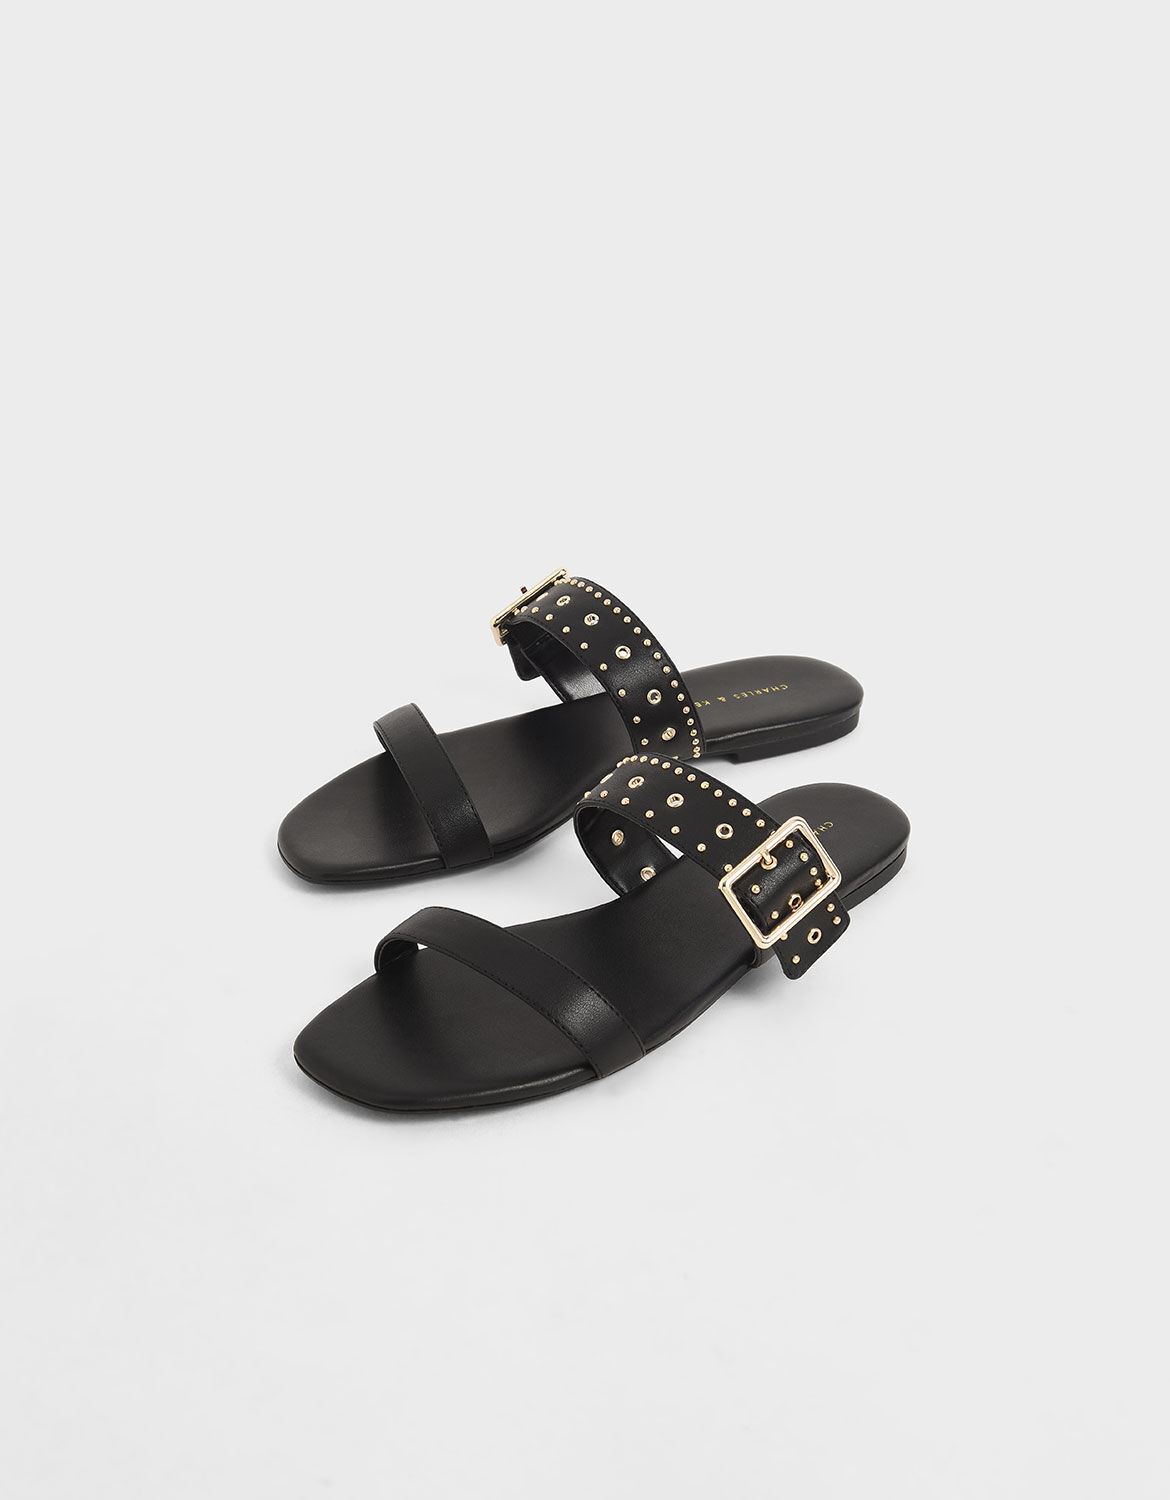 Shop Women's Sandals Online | CHARLES & KEITH SG